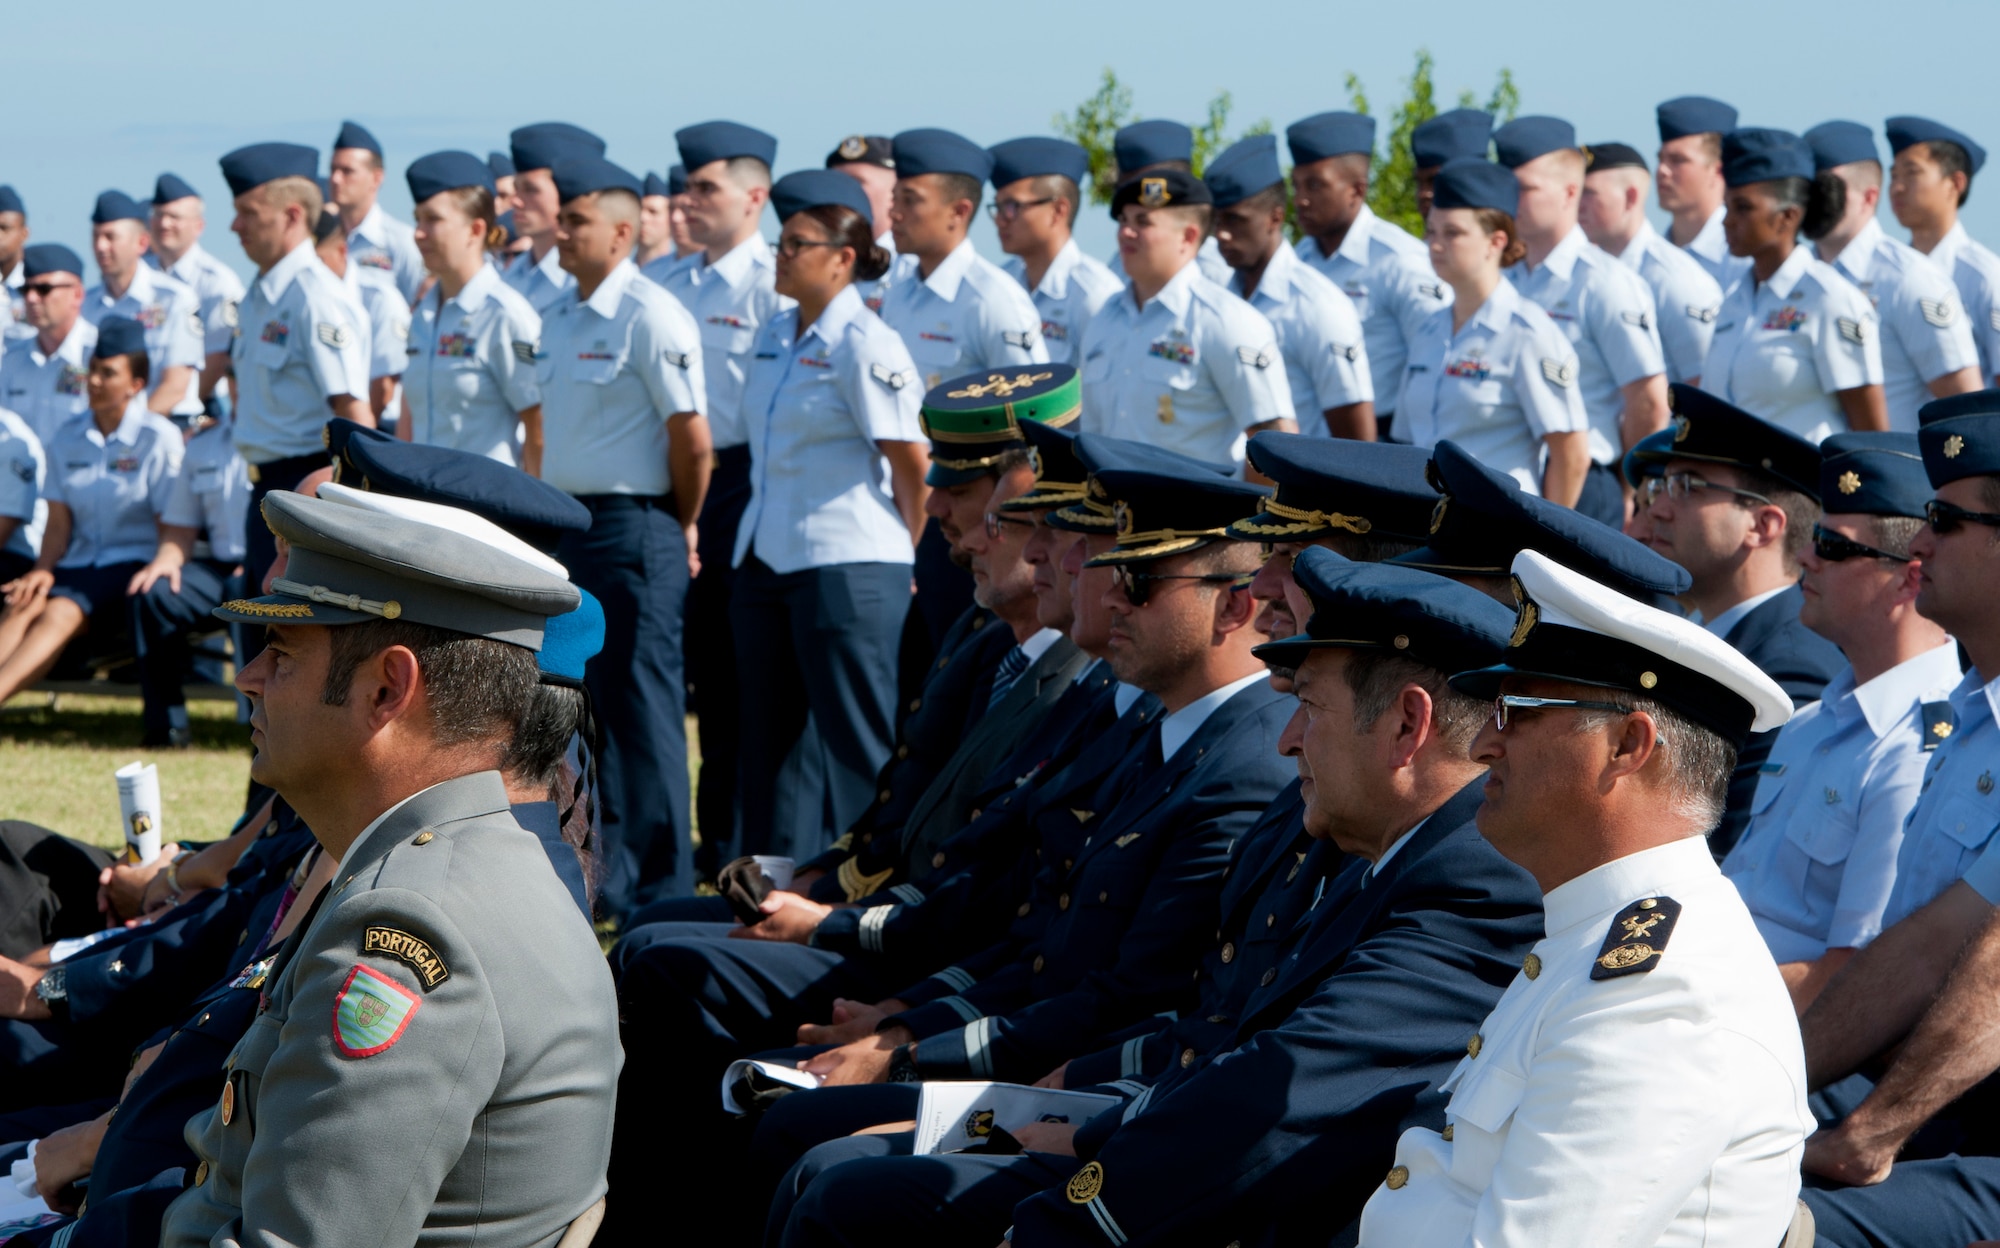 Members of the Portuguese military and U.S. Air Force watch the 65th Air Base Wing’s Redesignation Ceremony on Lajes Field, Azores, Portugal, August 14, 2015. The ceremony redesignated the 65th Air Base Wing into the 65th Air Base Group aligned under the 86th Airlift Wing, Ramstein Air Base, Germany. (U.S. Air Force photo by Master Sgt. Bradley C. Church)